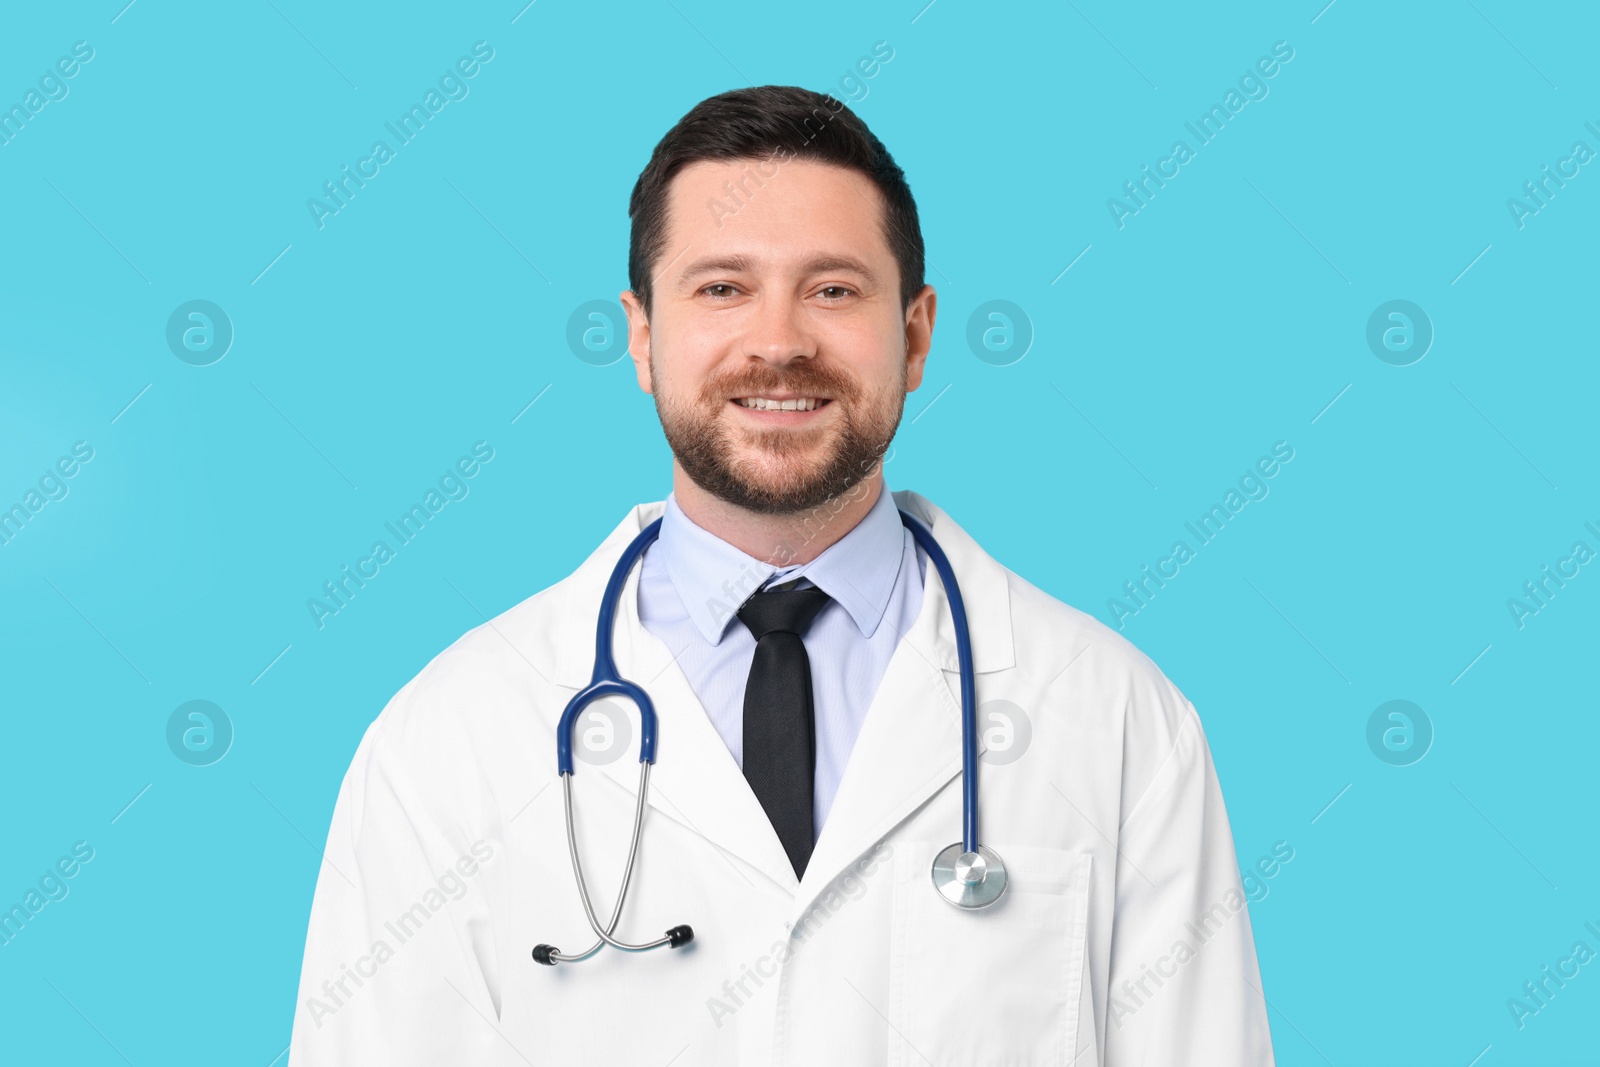 Photo of Smiling doctor with stethoscope on light blue background